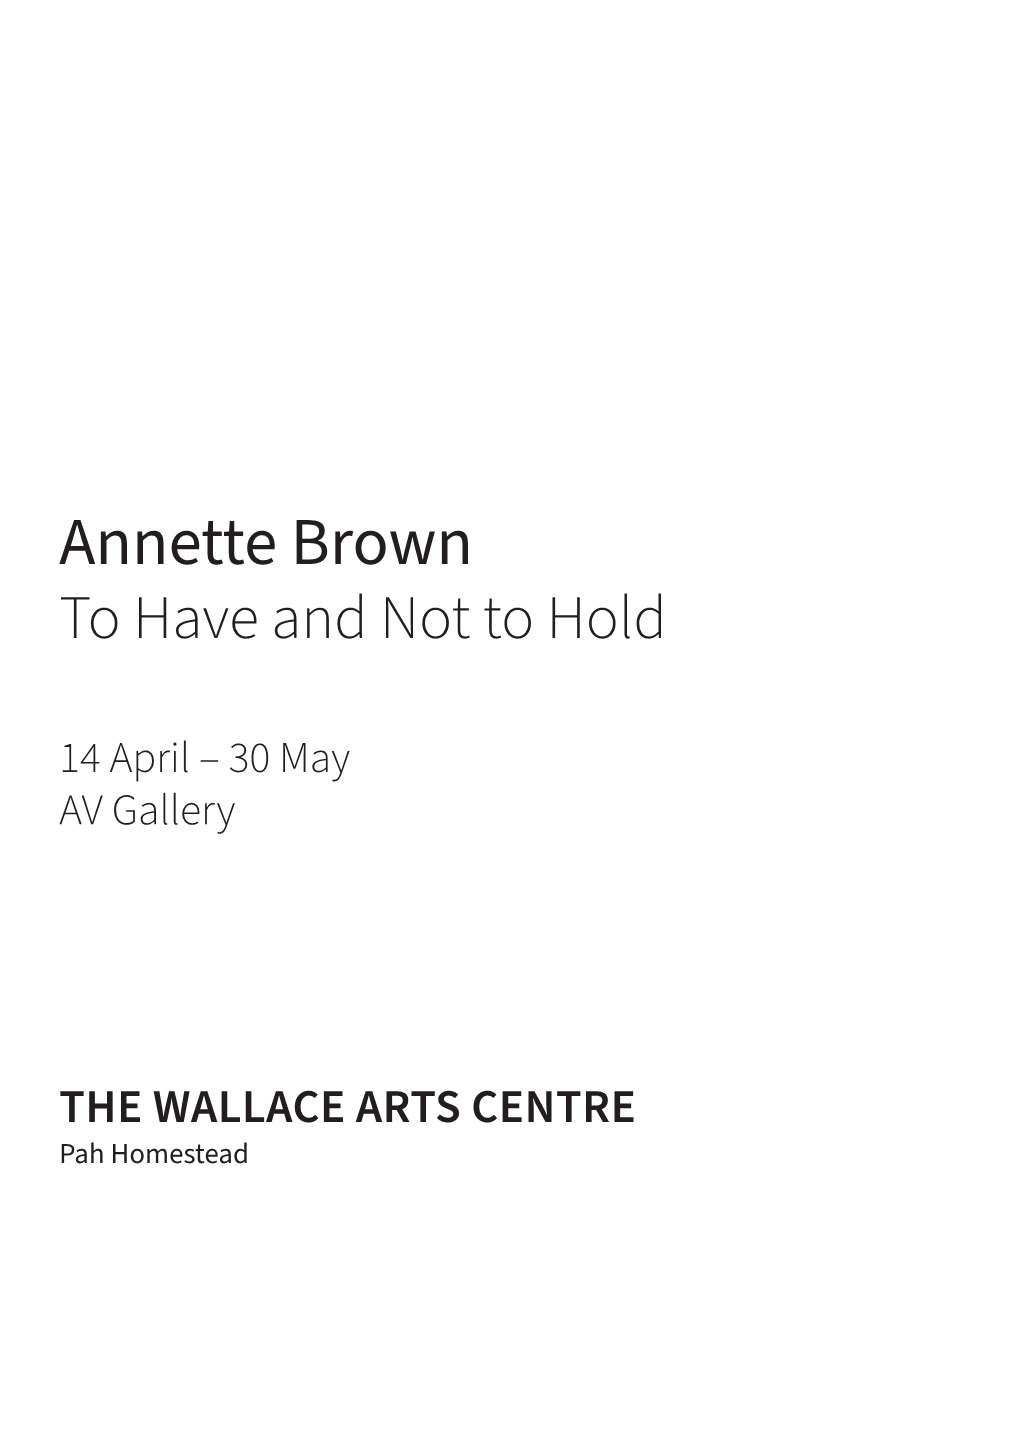 Annette Brown to Have and Not to Hold